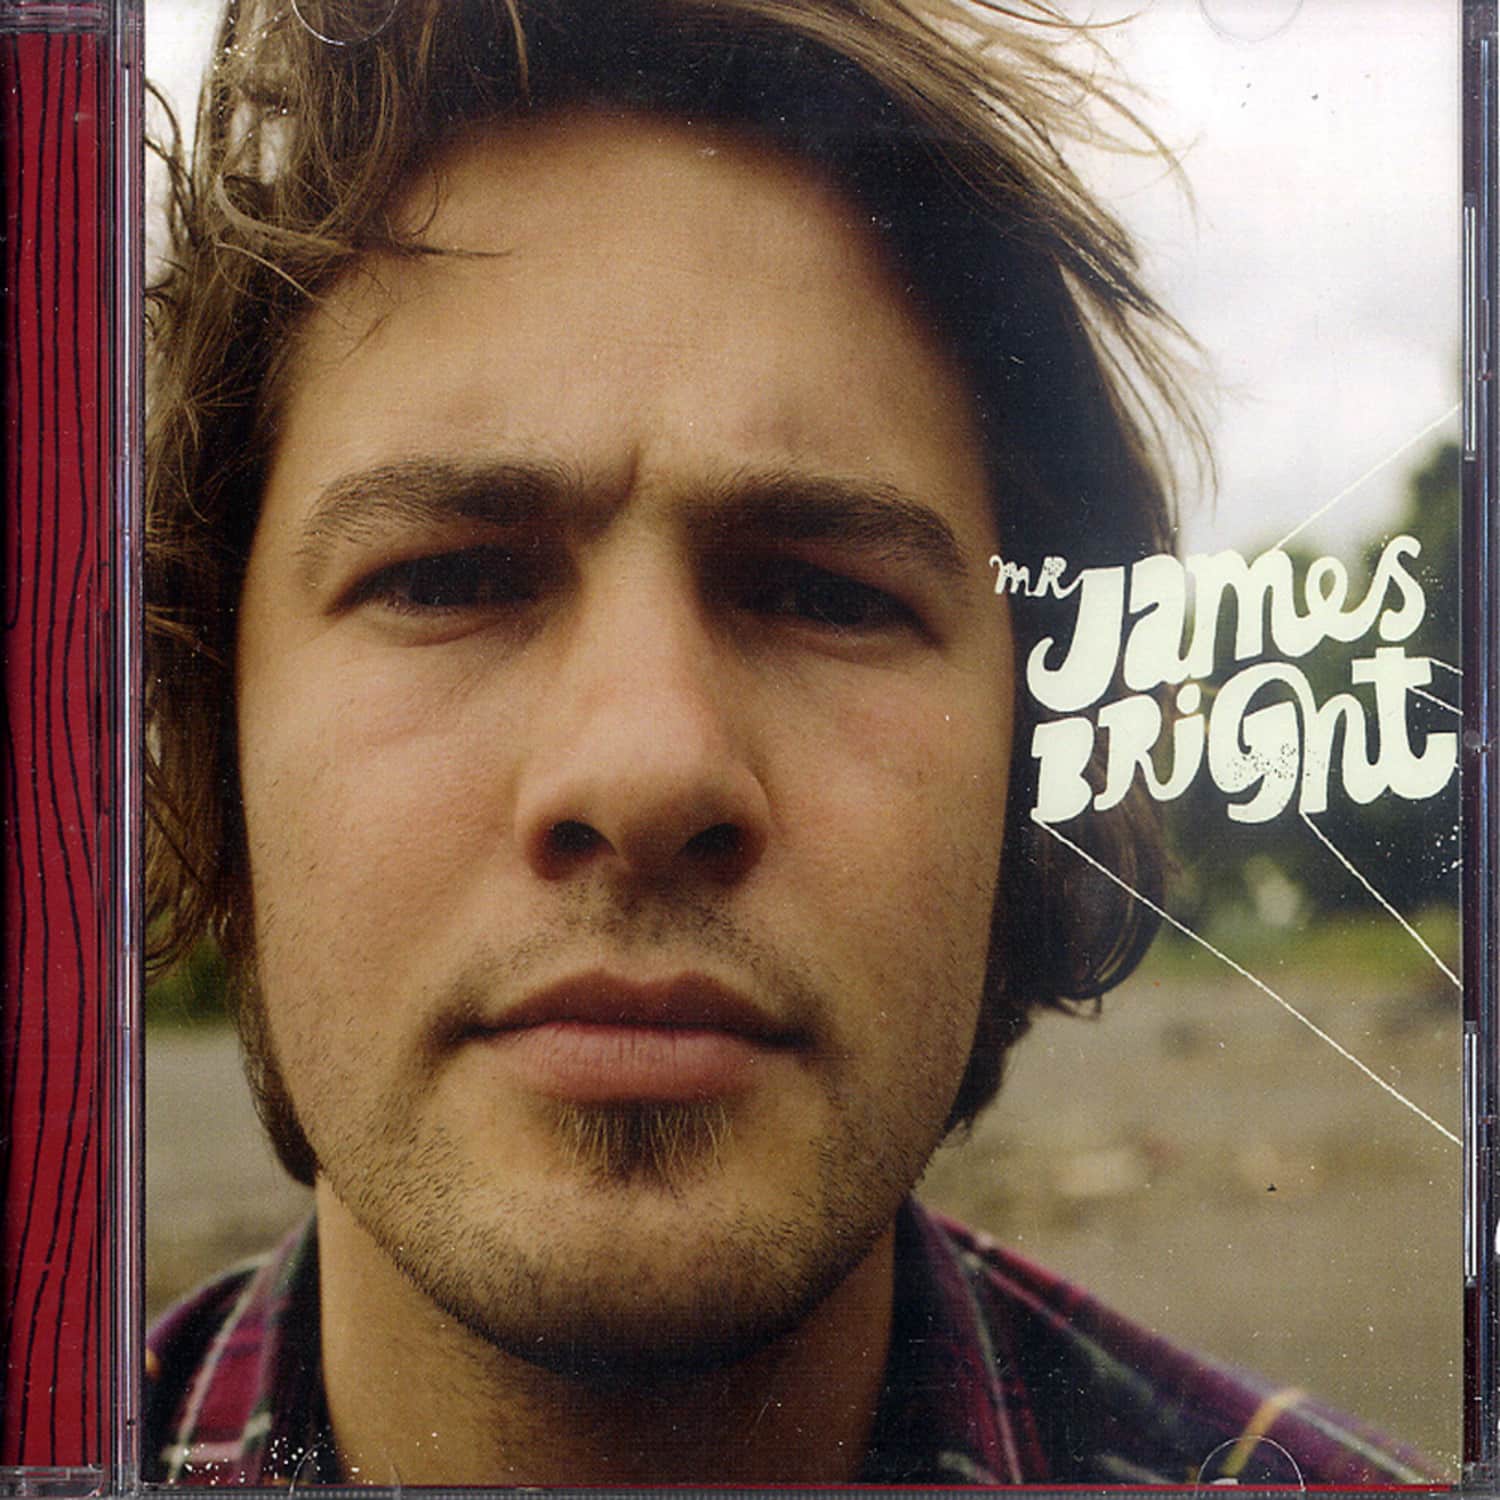 Mr James Bright - BIG SOUNDS FROM SMALL SPACES 